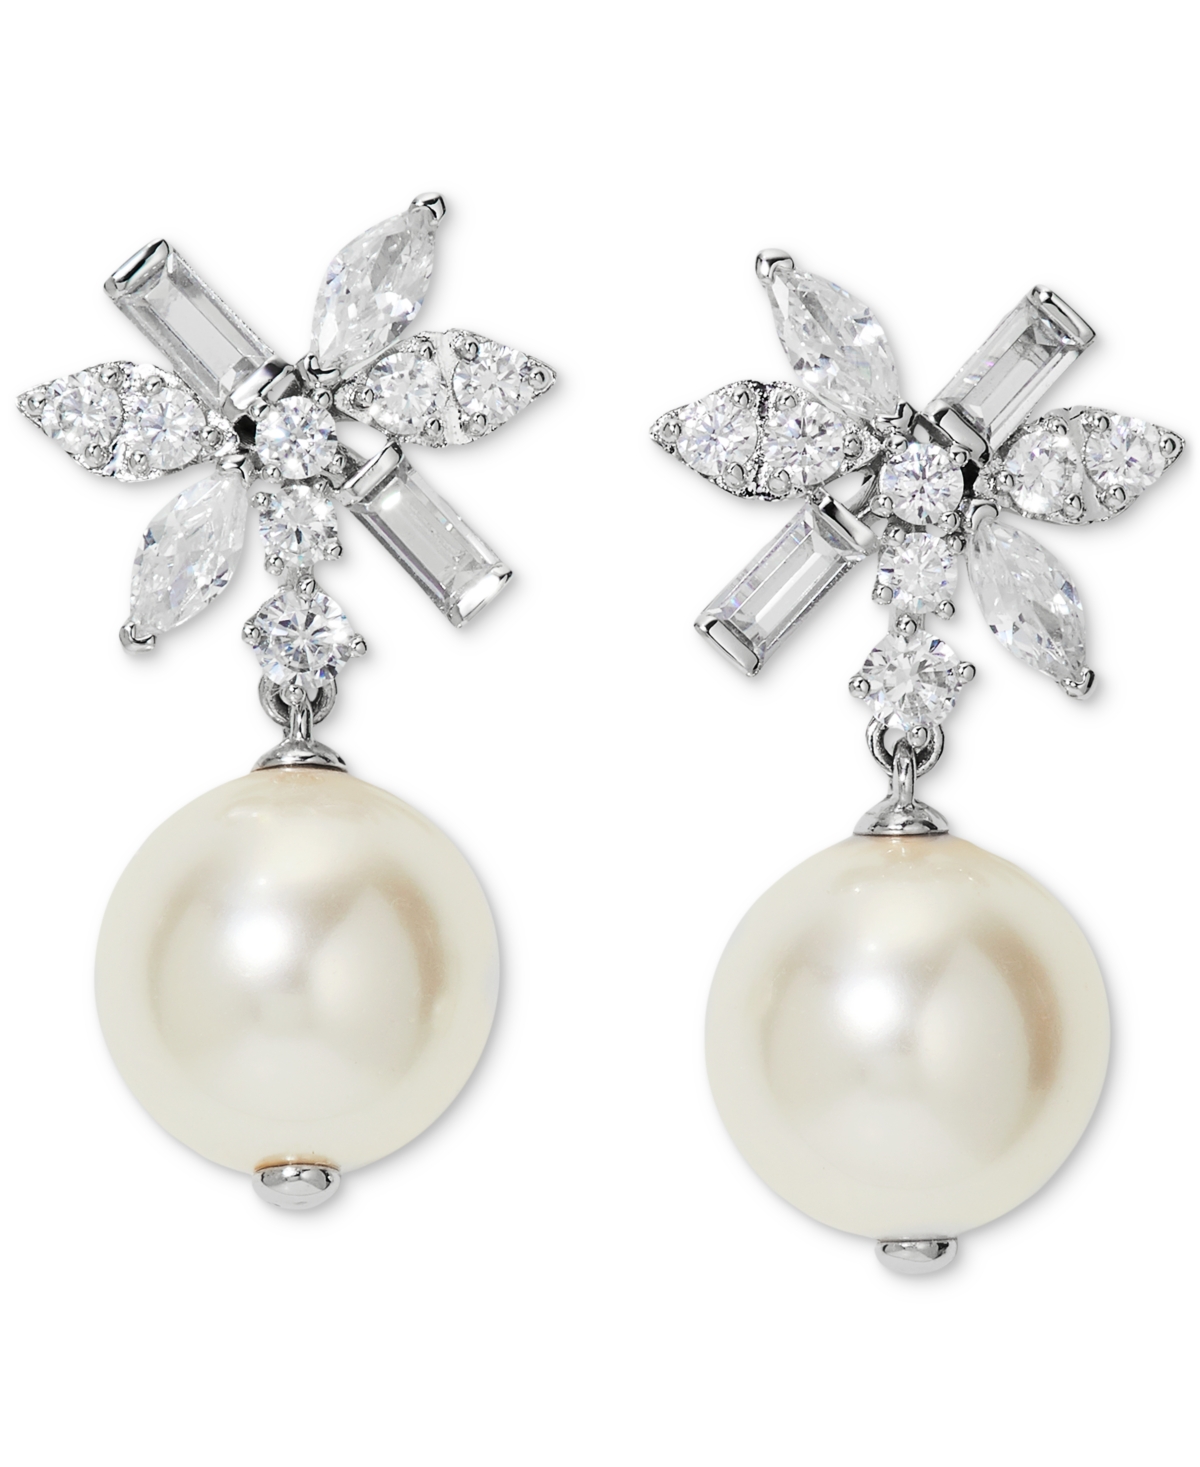 Silver-Tone Mixed Cubic Zirconia Cluster & Imitation Pearl Drop Earrings, Created for Macy's - Rhodium